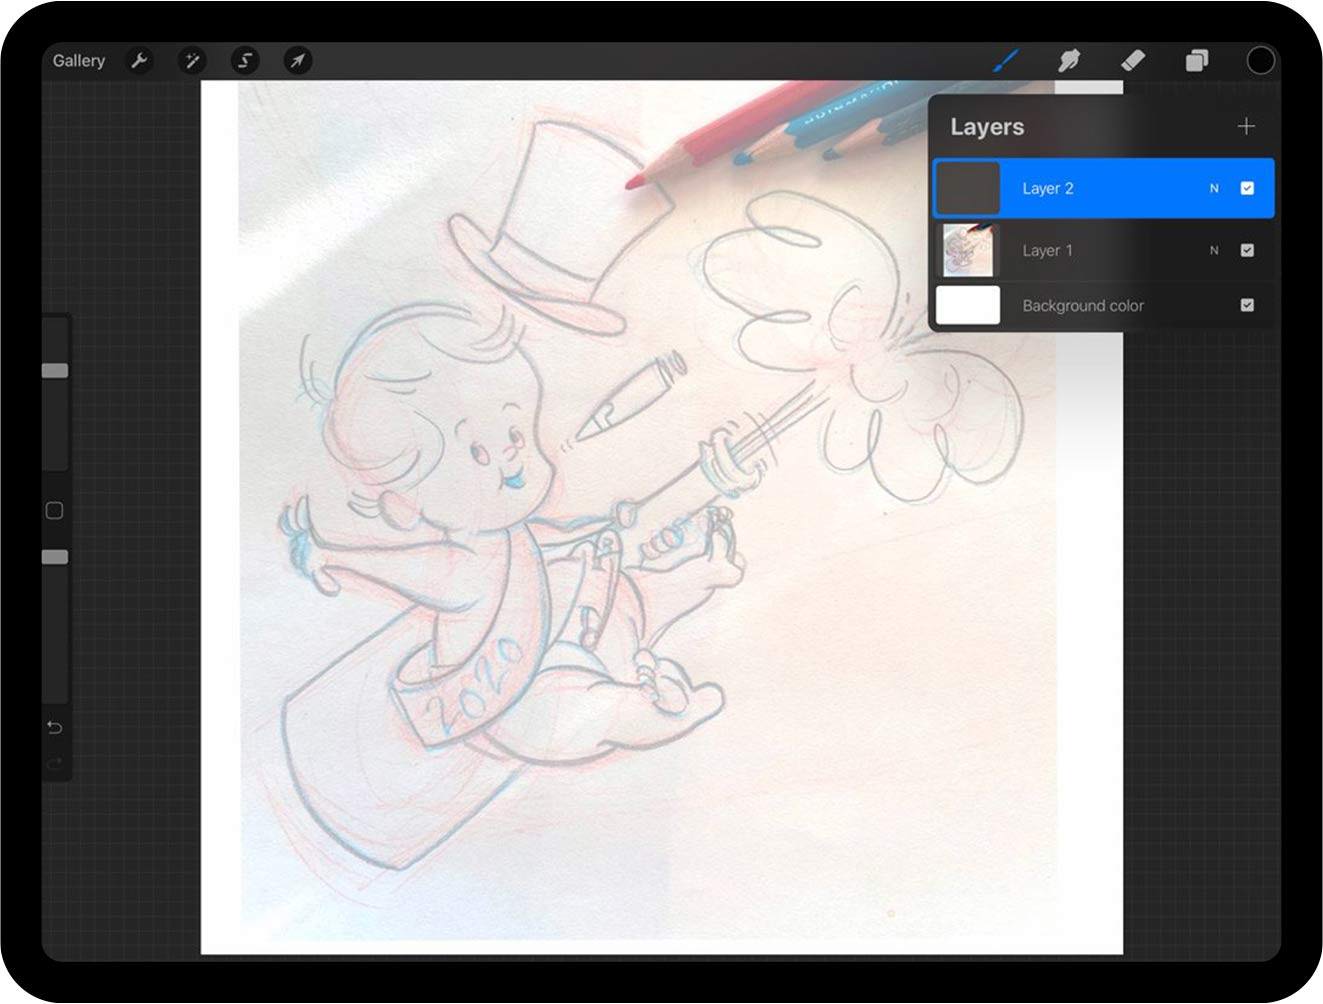 Sketch of new years baby in Procreate with layers panel open and new layer created